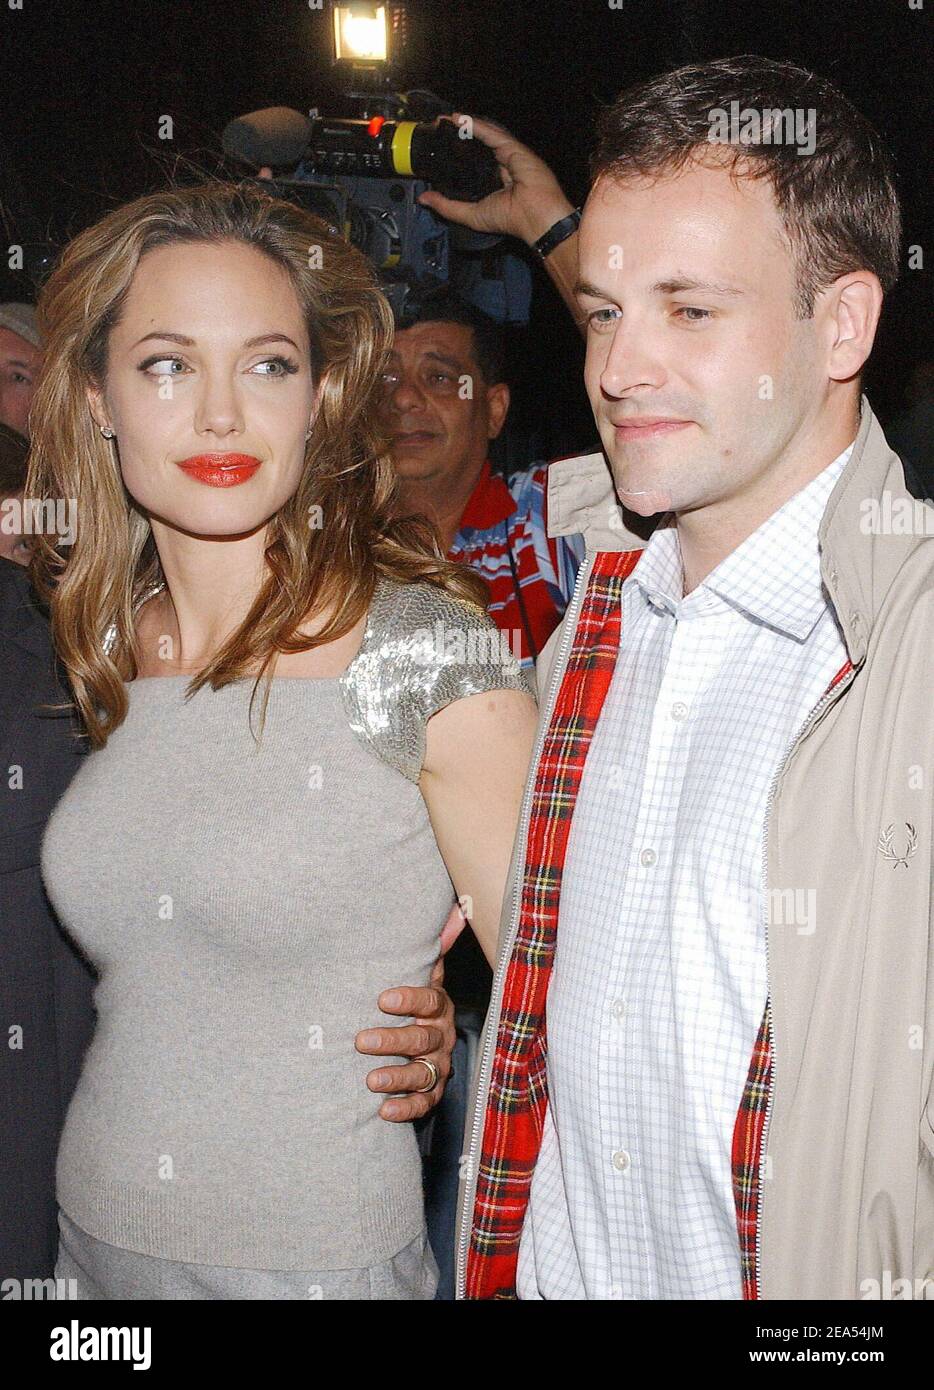 US actress Angelina Jolie and her ex-husband Johnny Lee Miller pose  together as they arrive at the 'Peace one Day' premiere screening held at  the Ziegfeld theatre in New York City, NY,